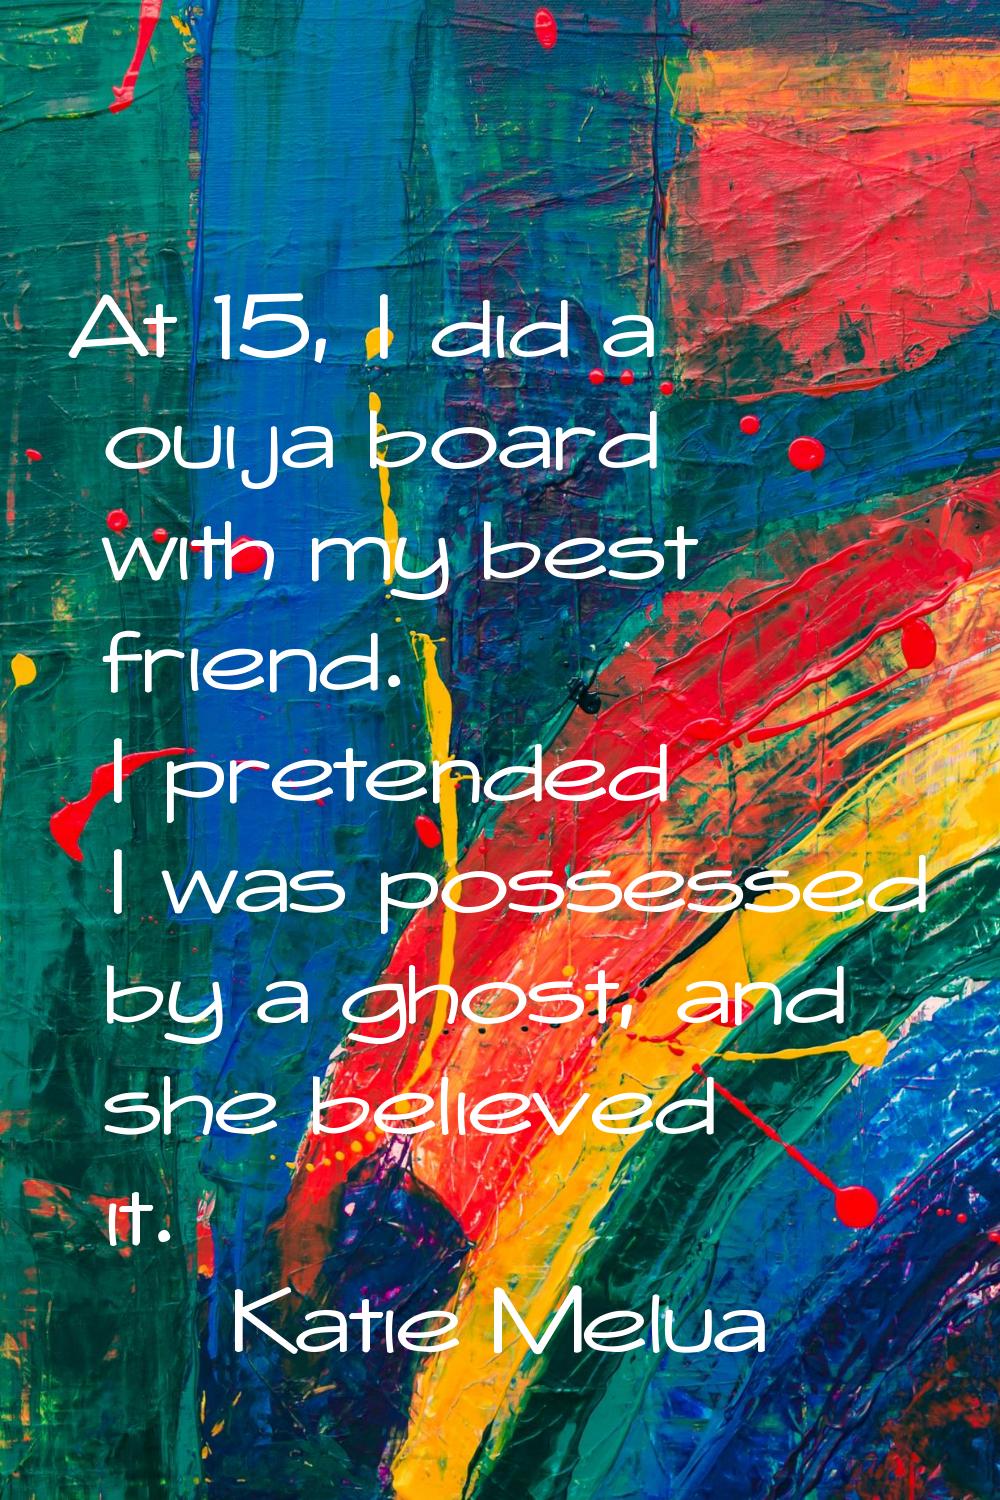 At 15, I did a ouija board with my best friend. I pretended I was possessed by a ghost, and she bel